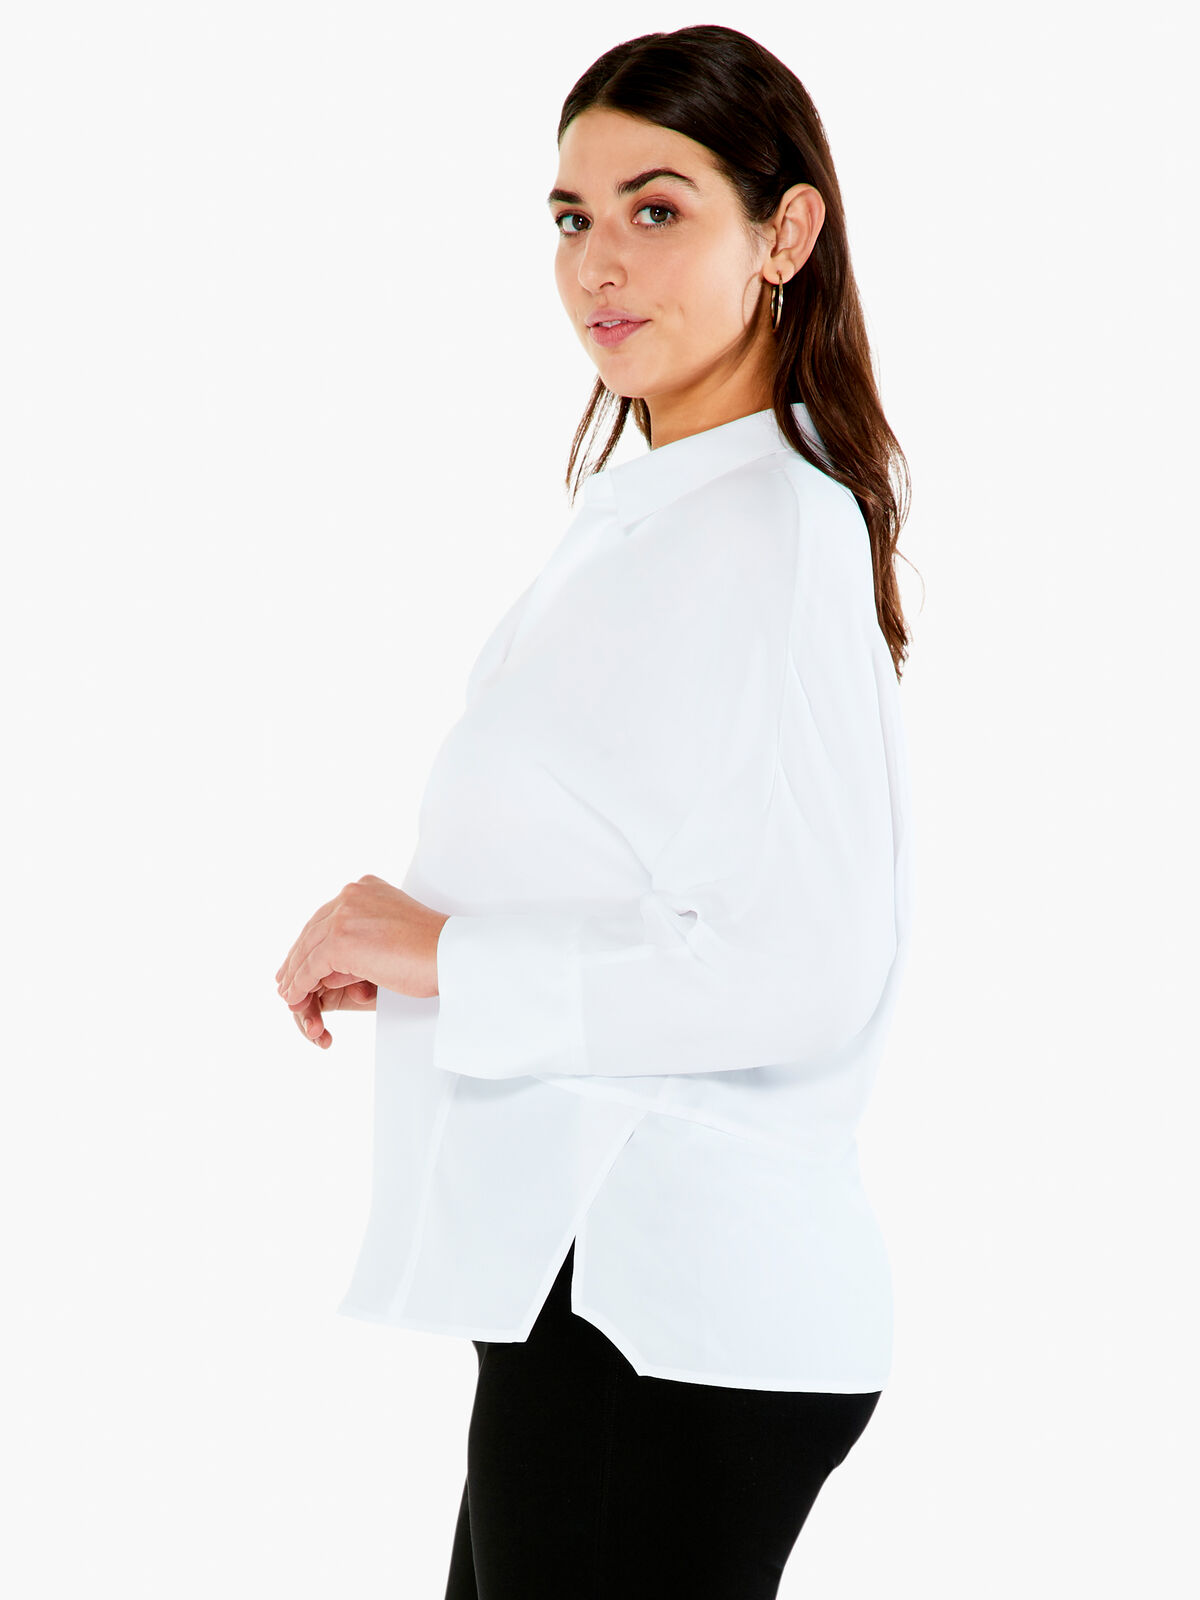 Flowing Ease Blouse